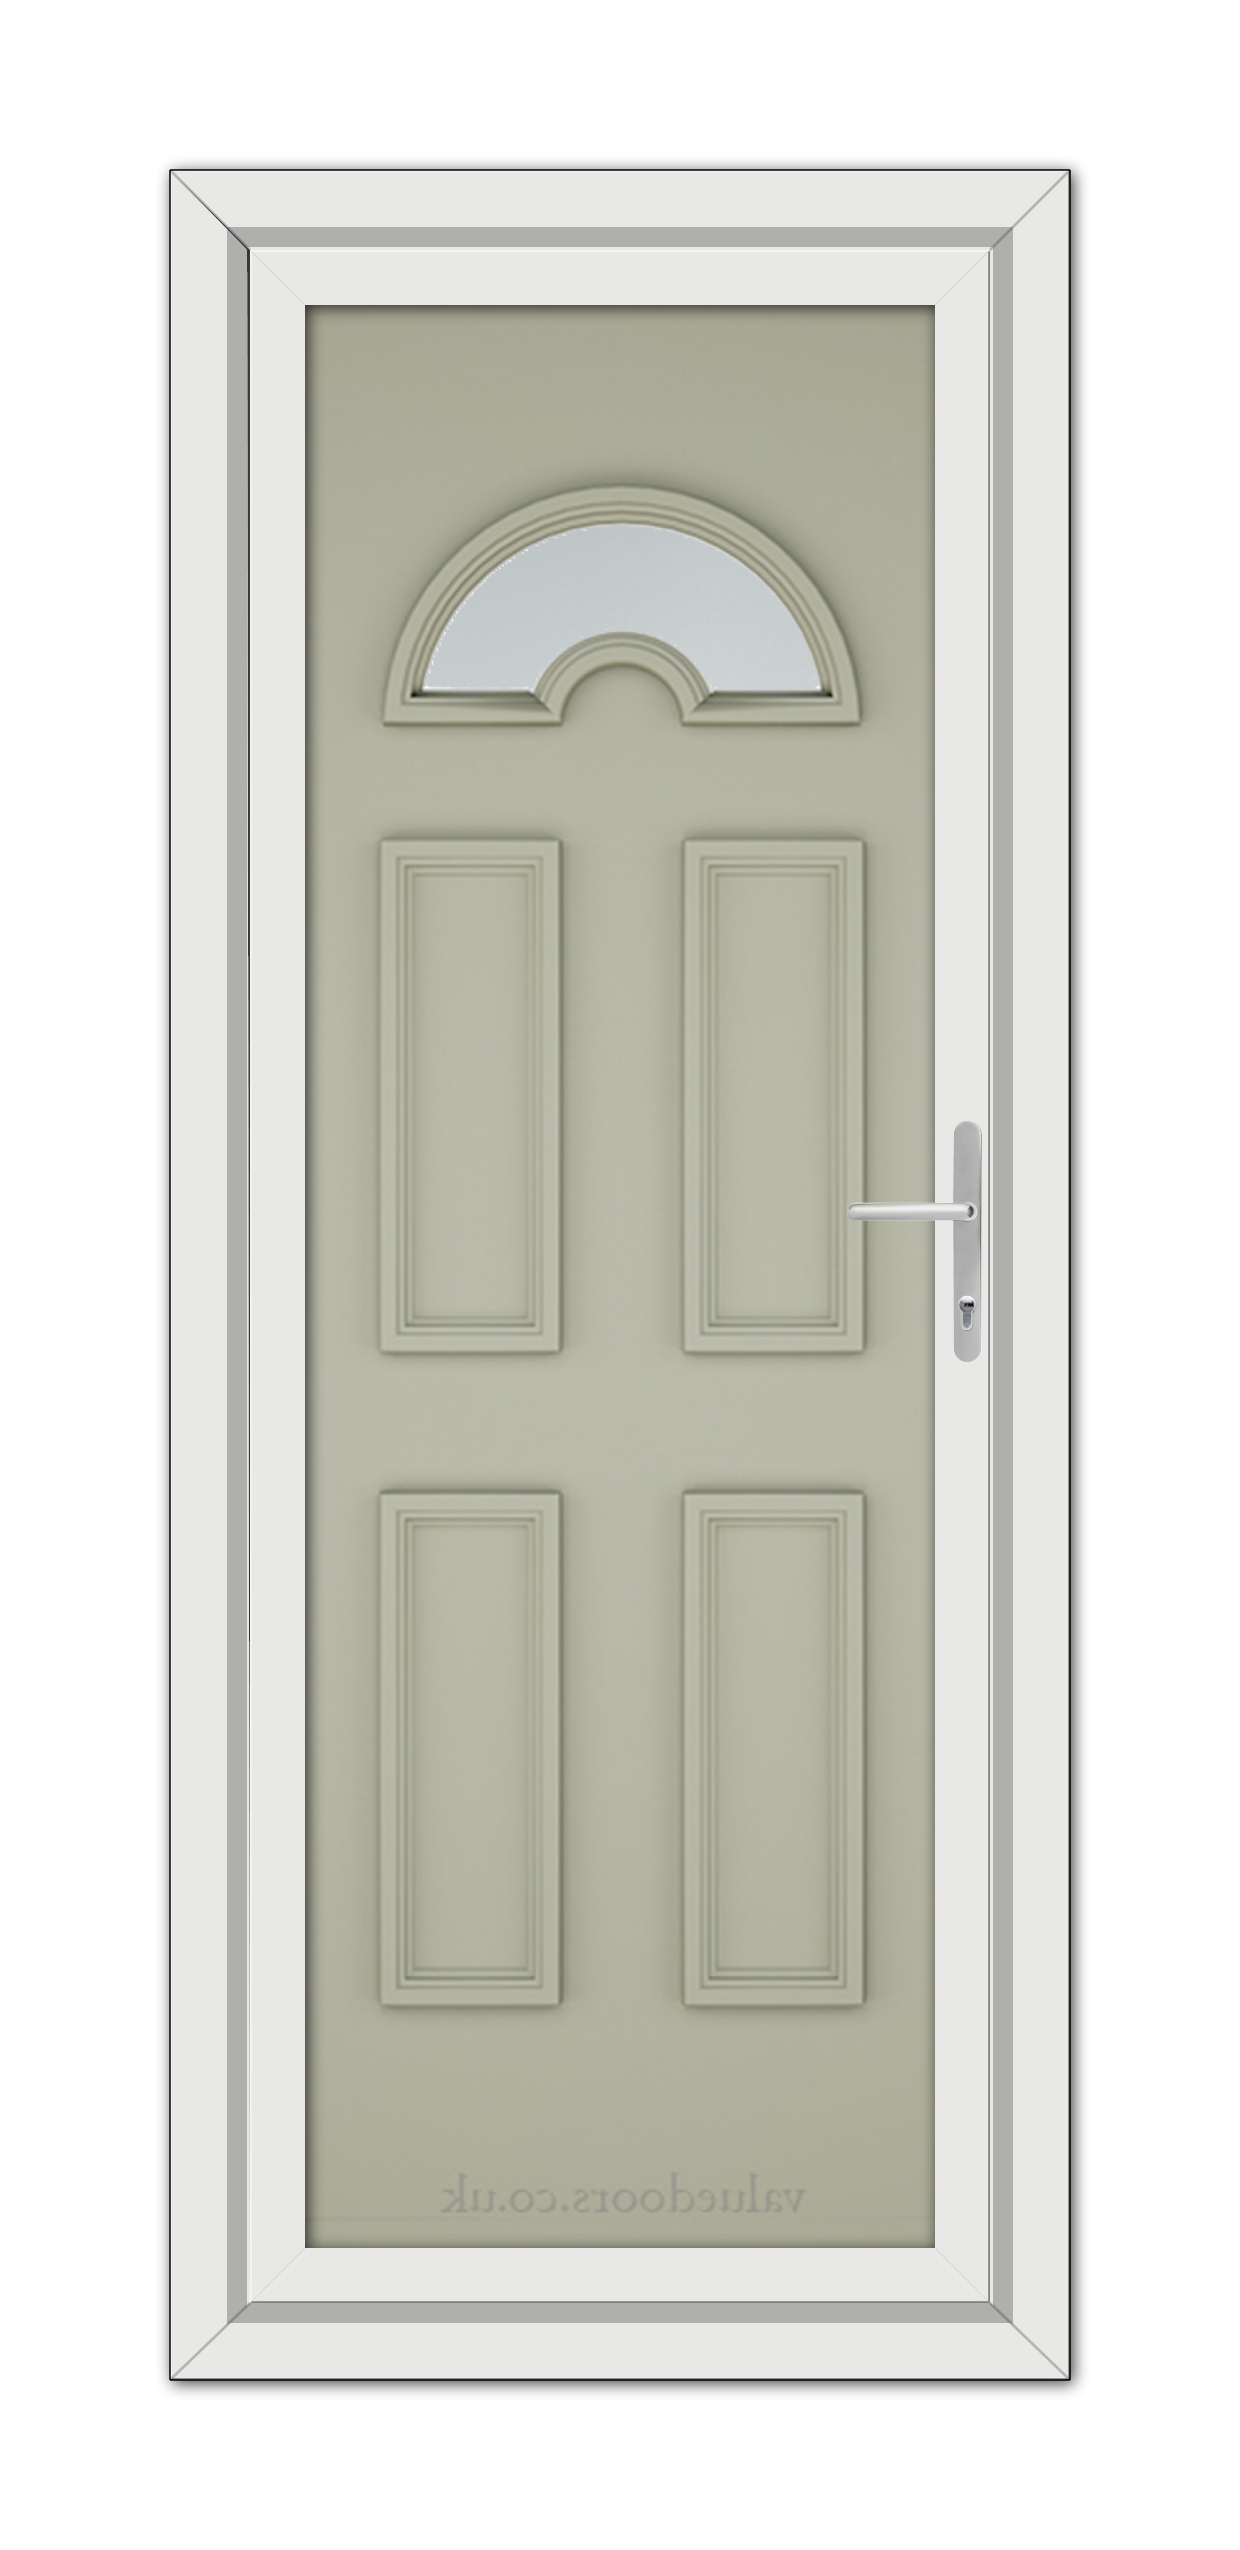 A vertical image of a closed, Agate Grey Sandringham uPVC front door with a half-moon window at the top and a metal handle on the right side, set in a white frame.